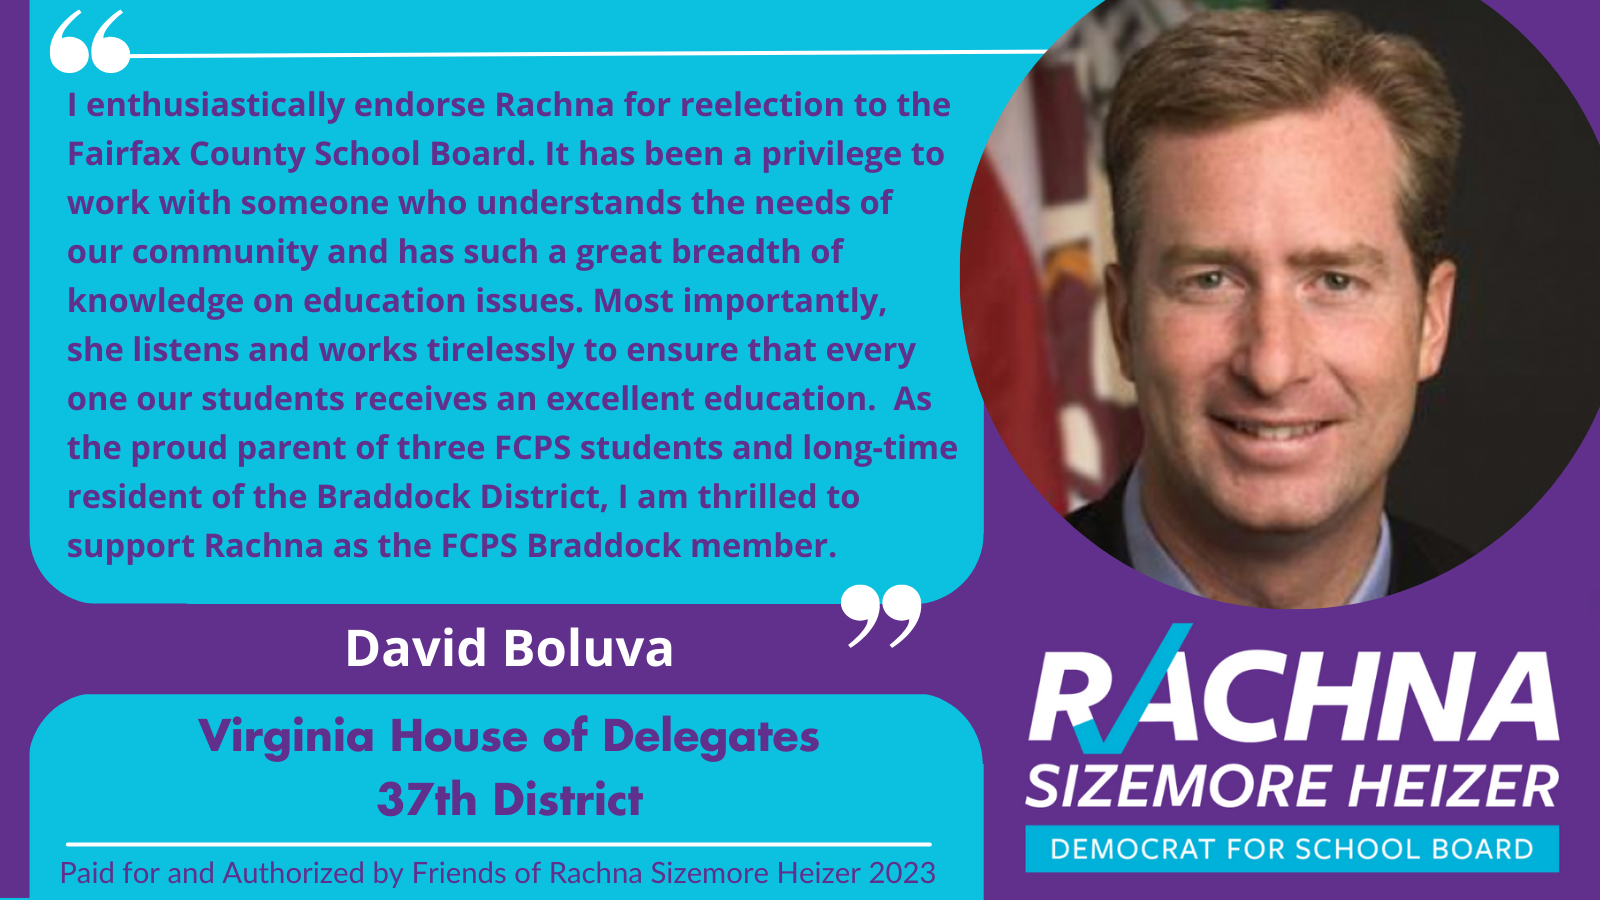  Endorsement from Delegate David Bulova, Virginia House of Delegates 37th District. The quote from David Bulova is “I enthusiastically endorse Rachna for reelection to the Fairfax County School Board. It has been a privilege to work with someone who 